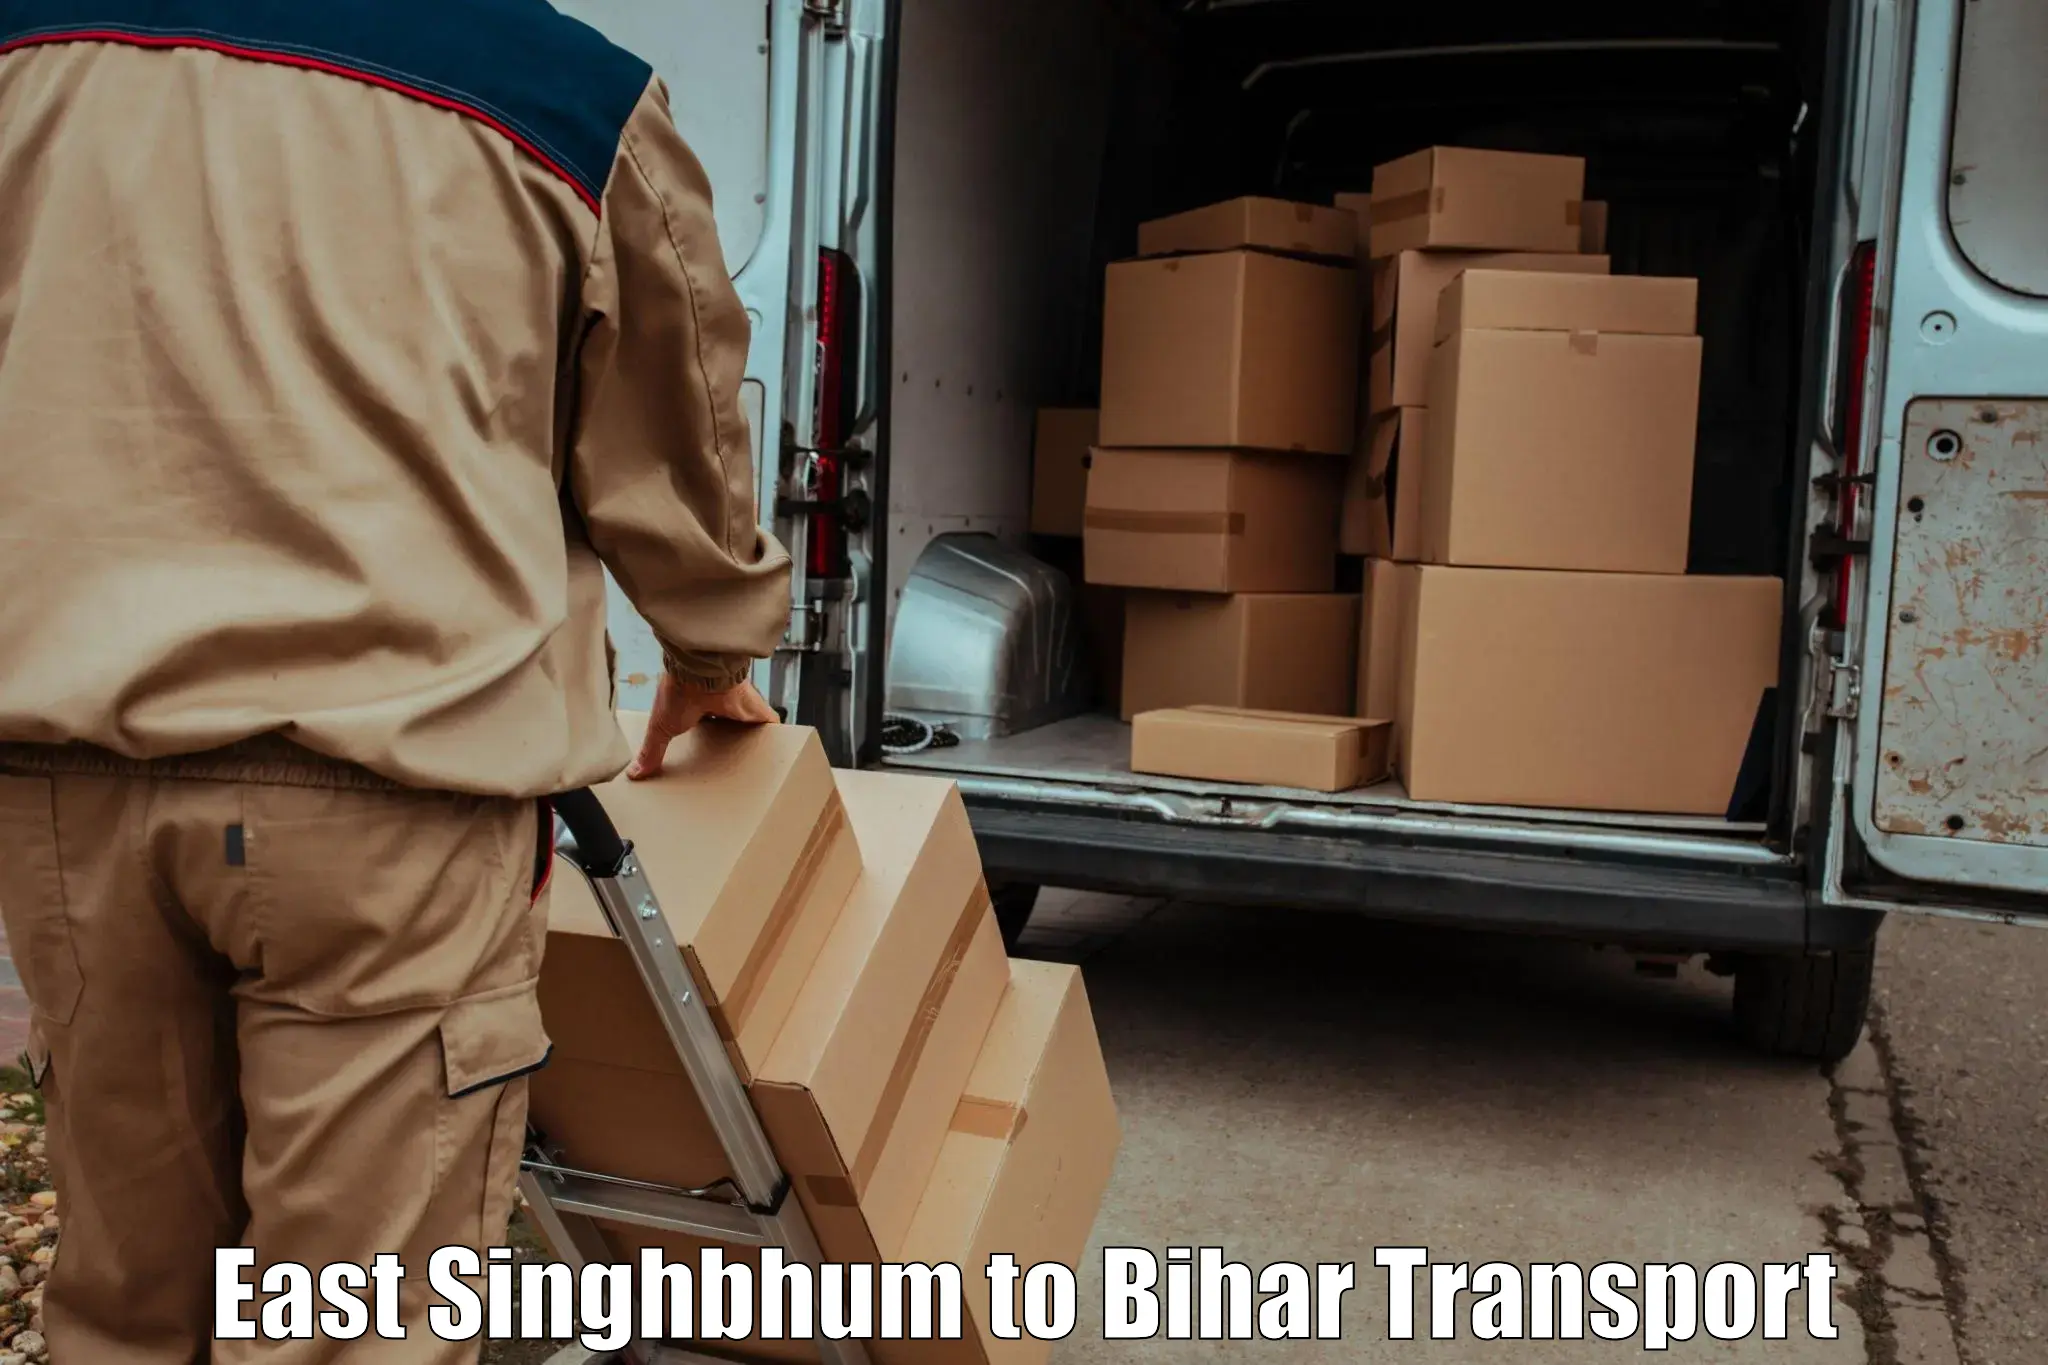 Air freight transport services in East Singhbhum to Maranga